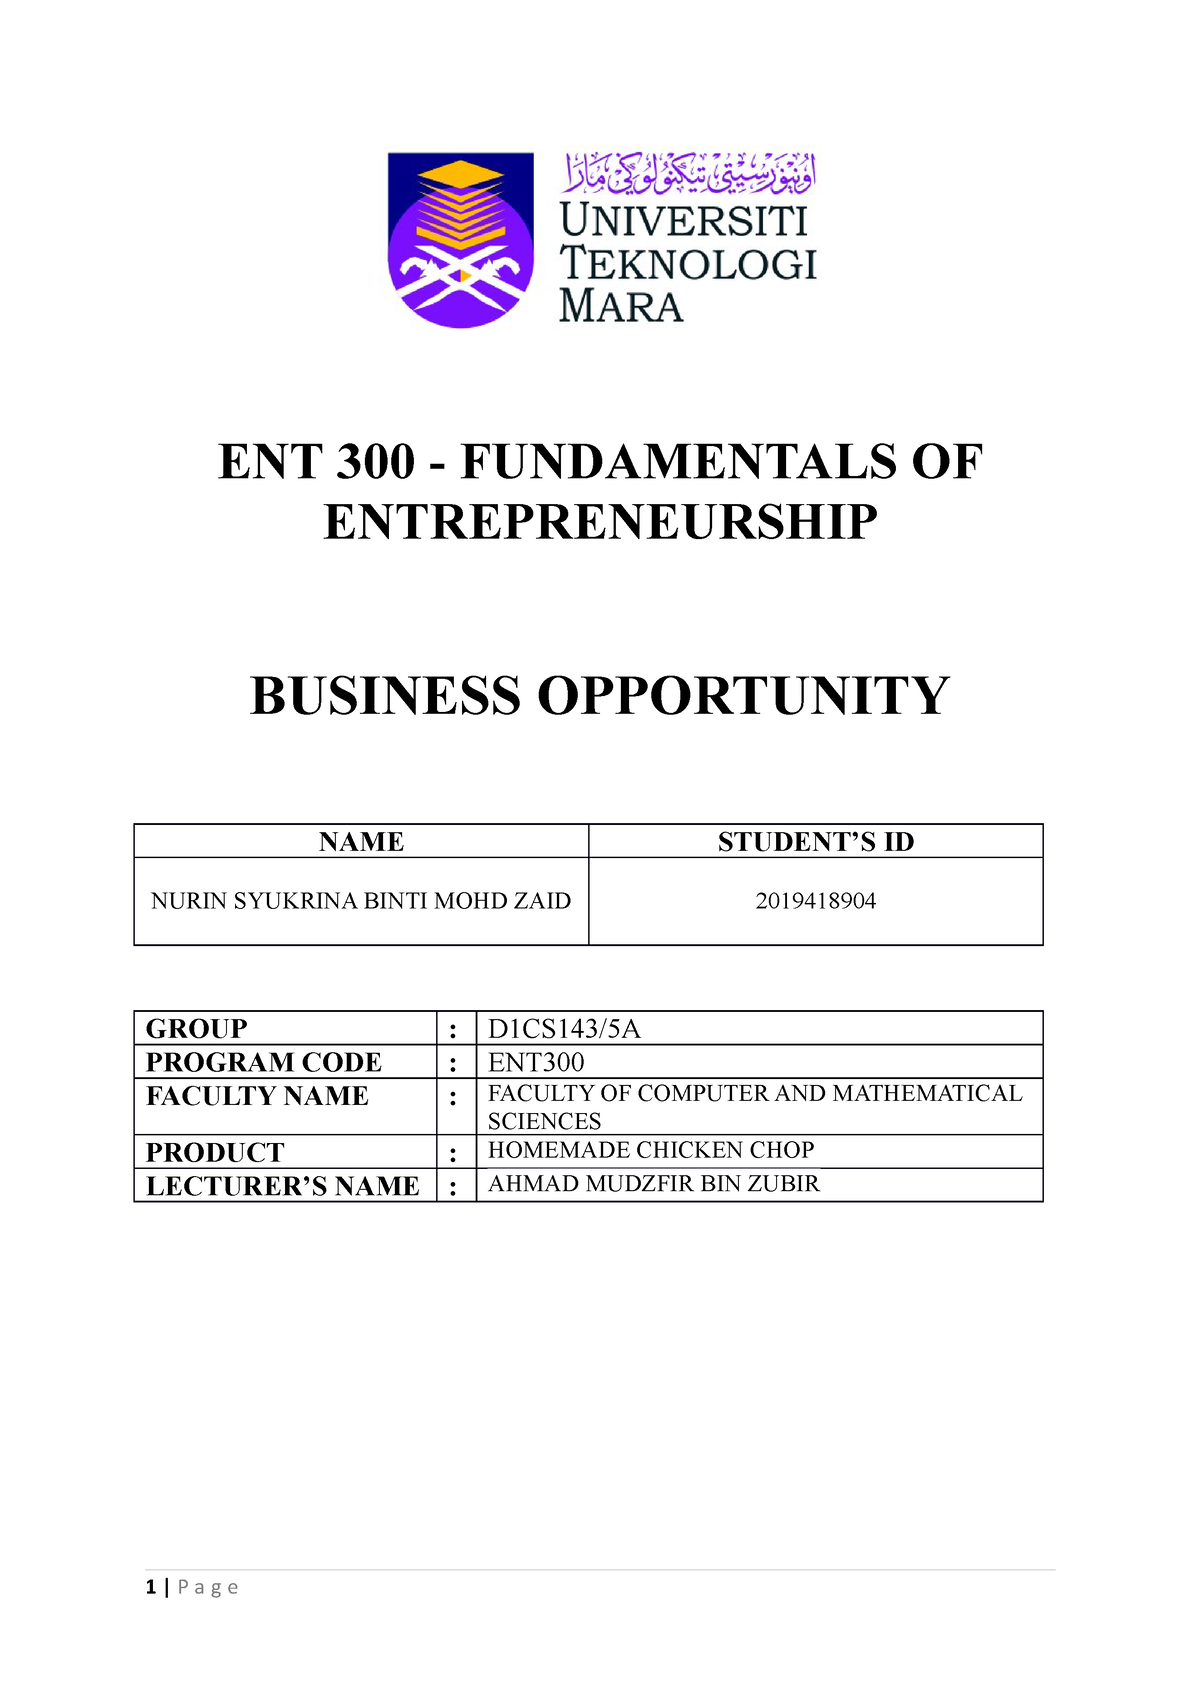 individual assignment ent300